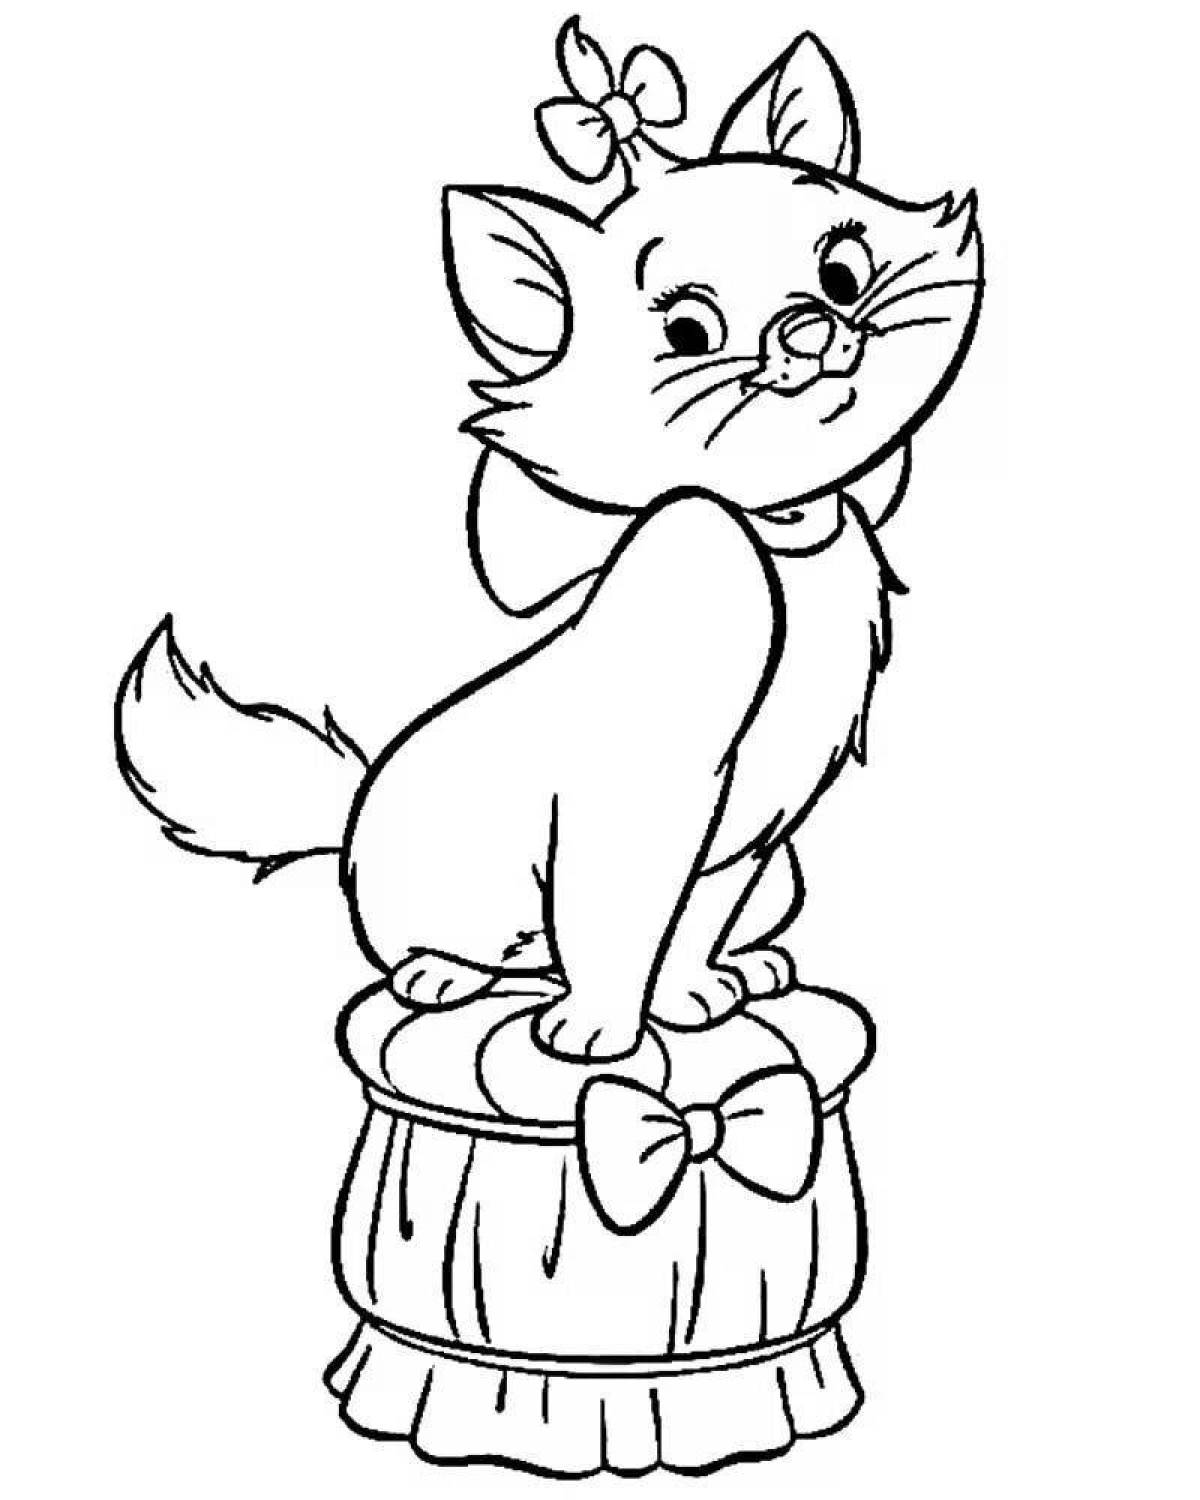 Attractive kitten coloring book for 5-6 year olds